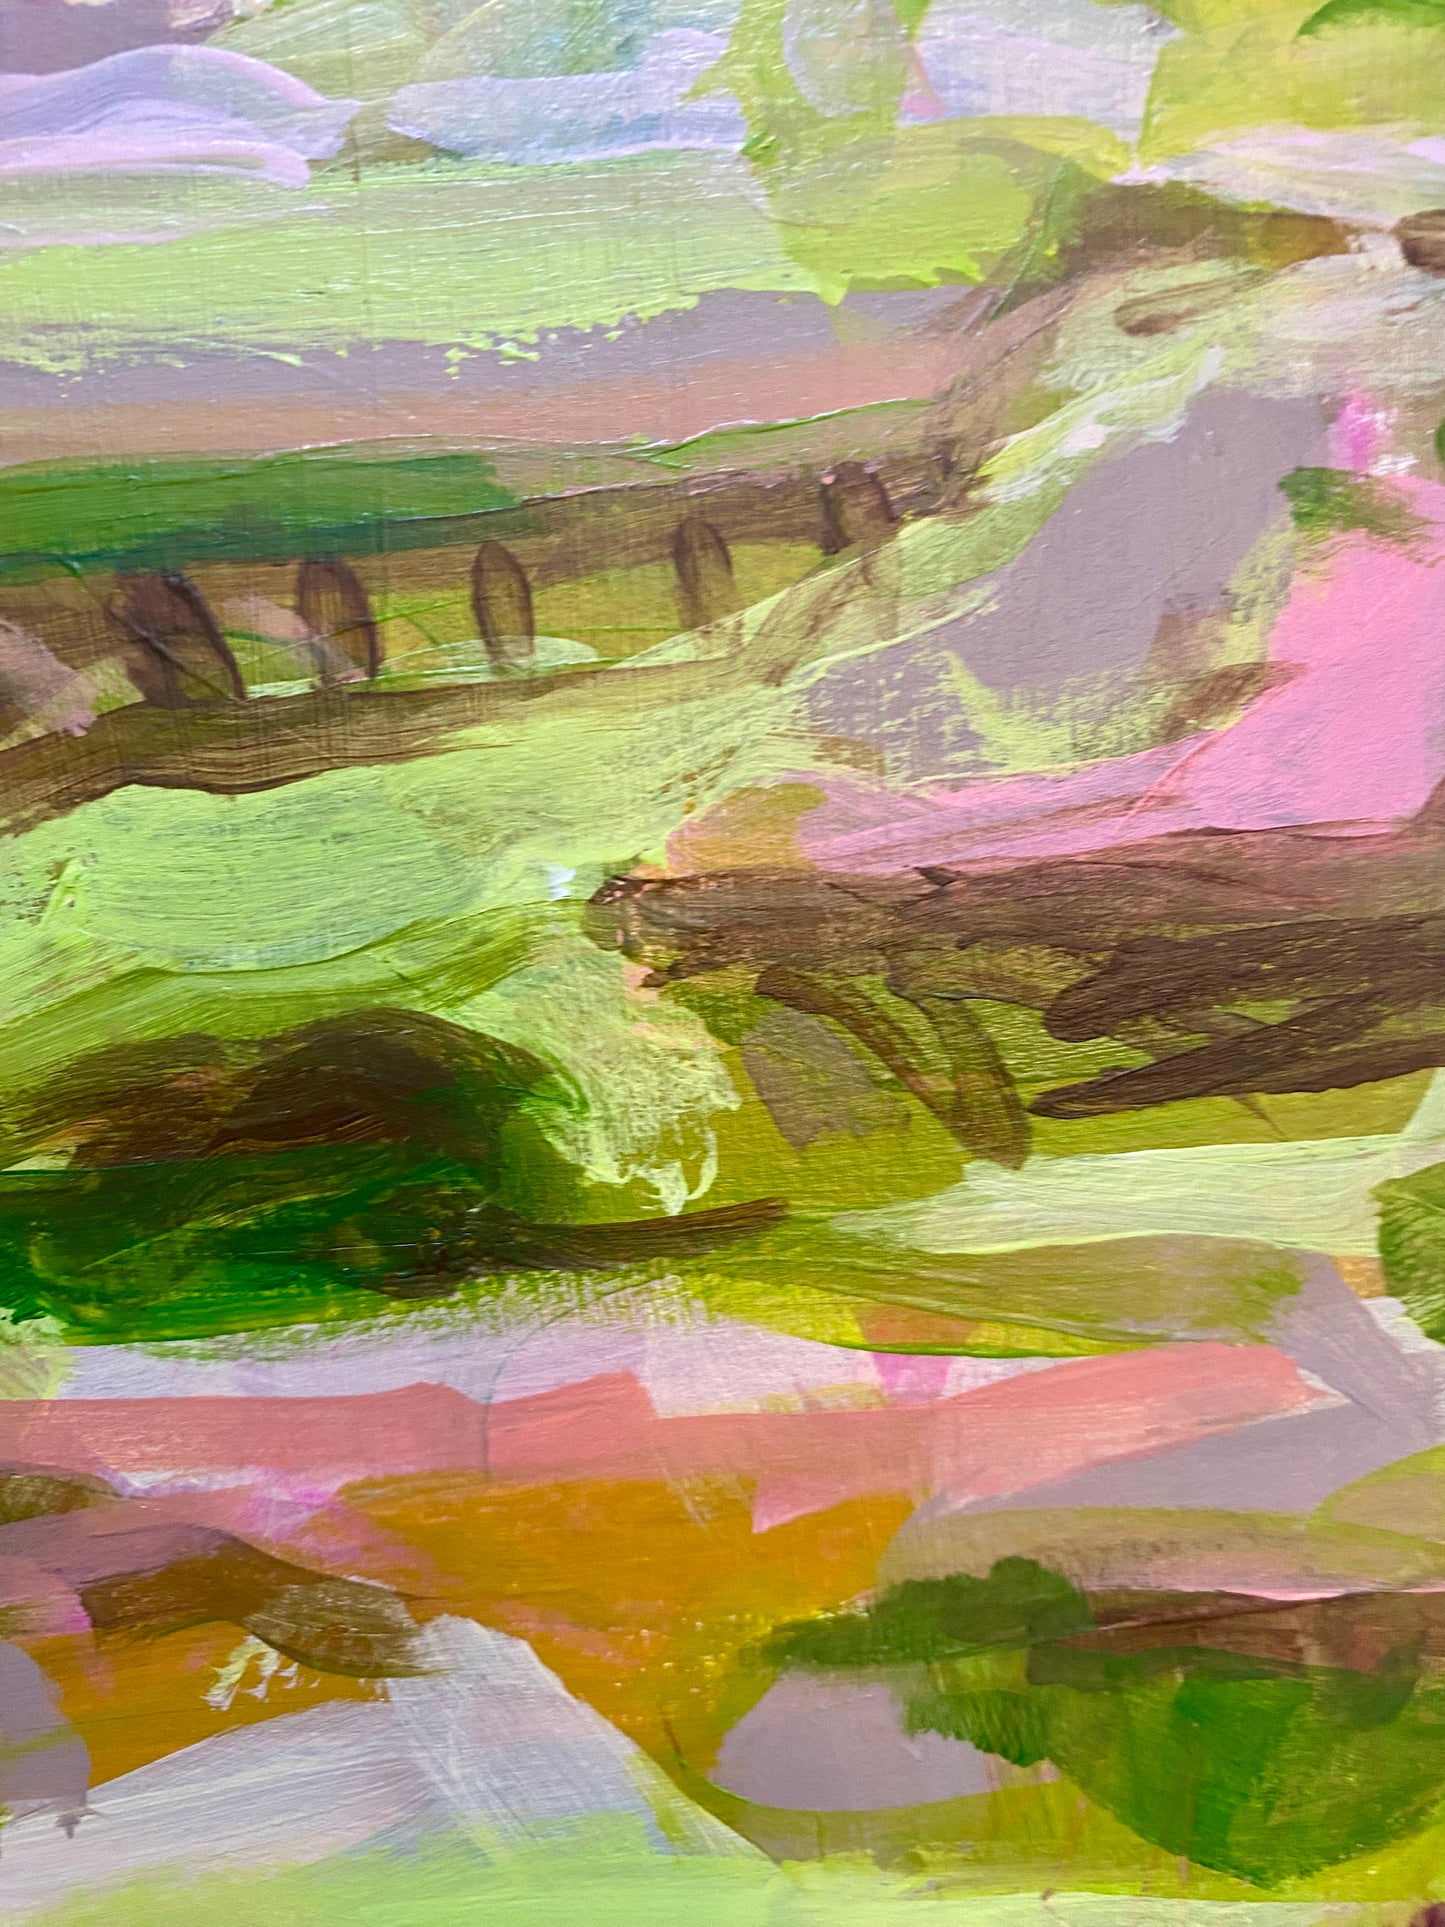 Abstract Landscape Acrylic Painitng on 10" by 8" primed paper by artist Megan Watkins